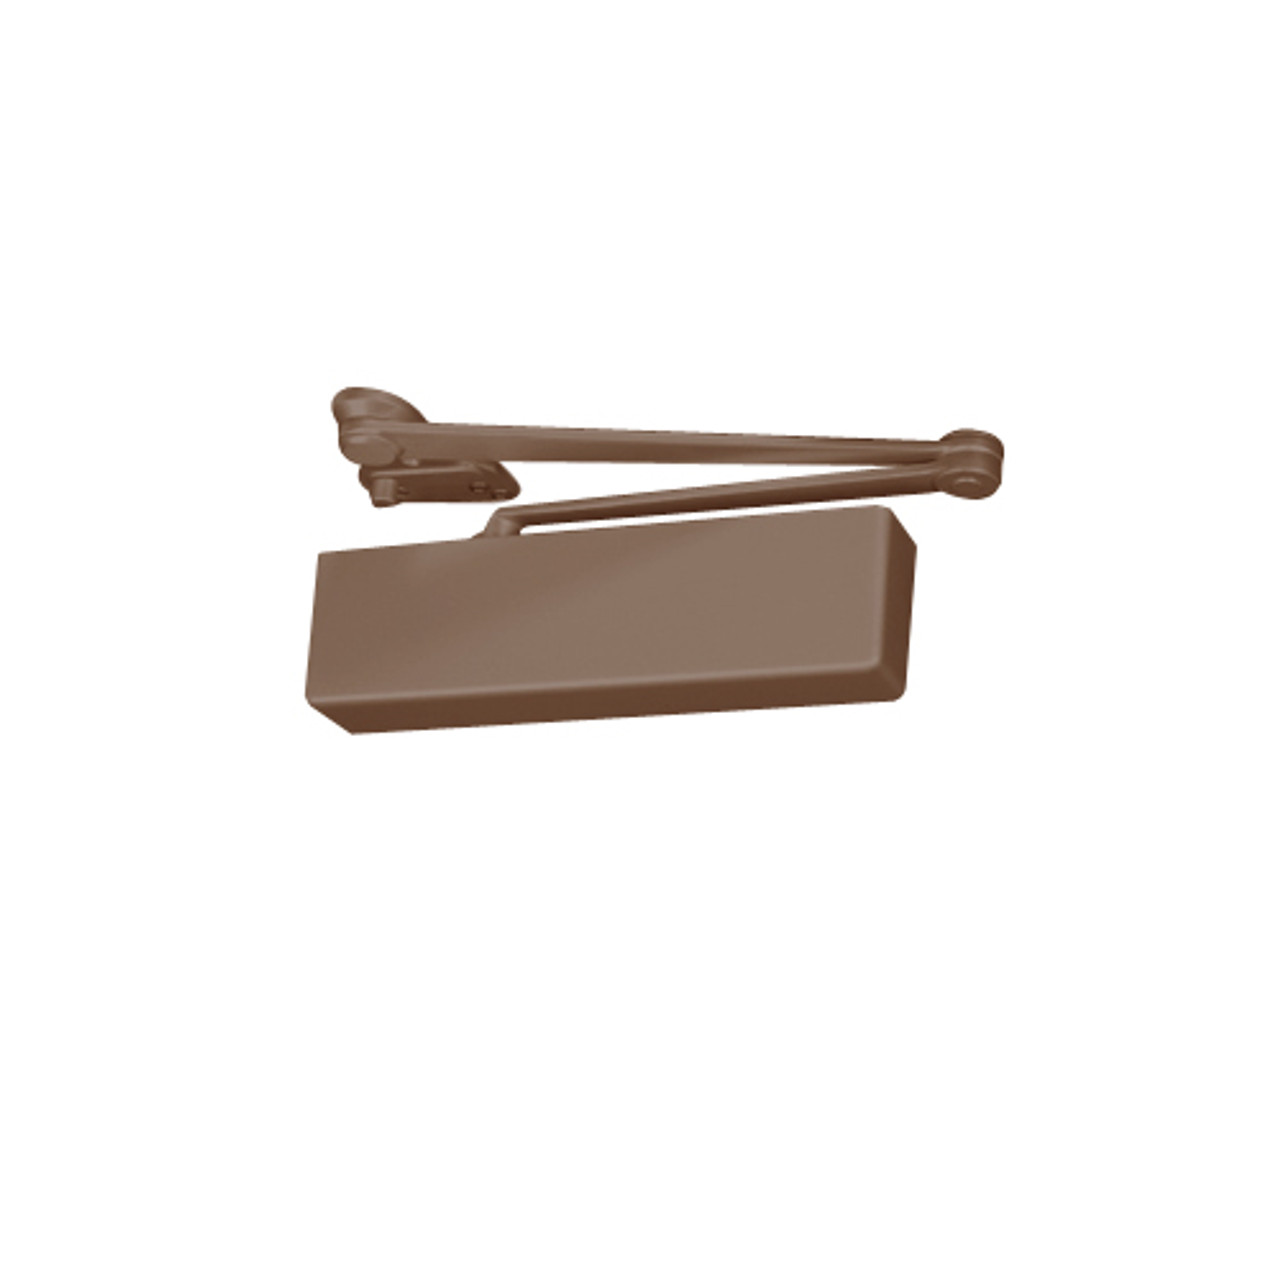 CLP7500M-691 Norton 7500 Series Non-Hold Open Institutional Door Closer with CloserPlus Arm in Dull Bronze Finish